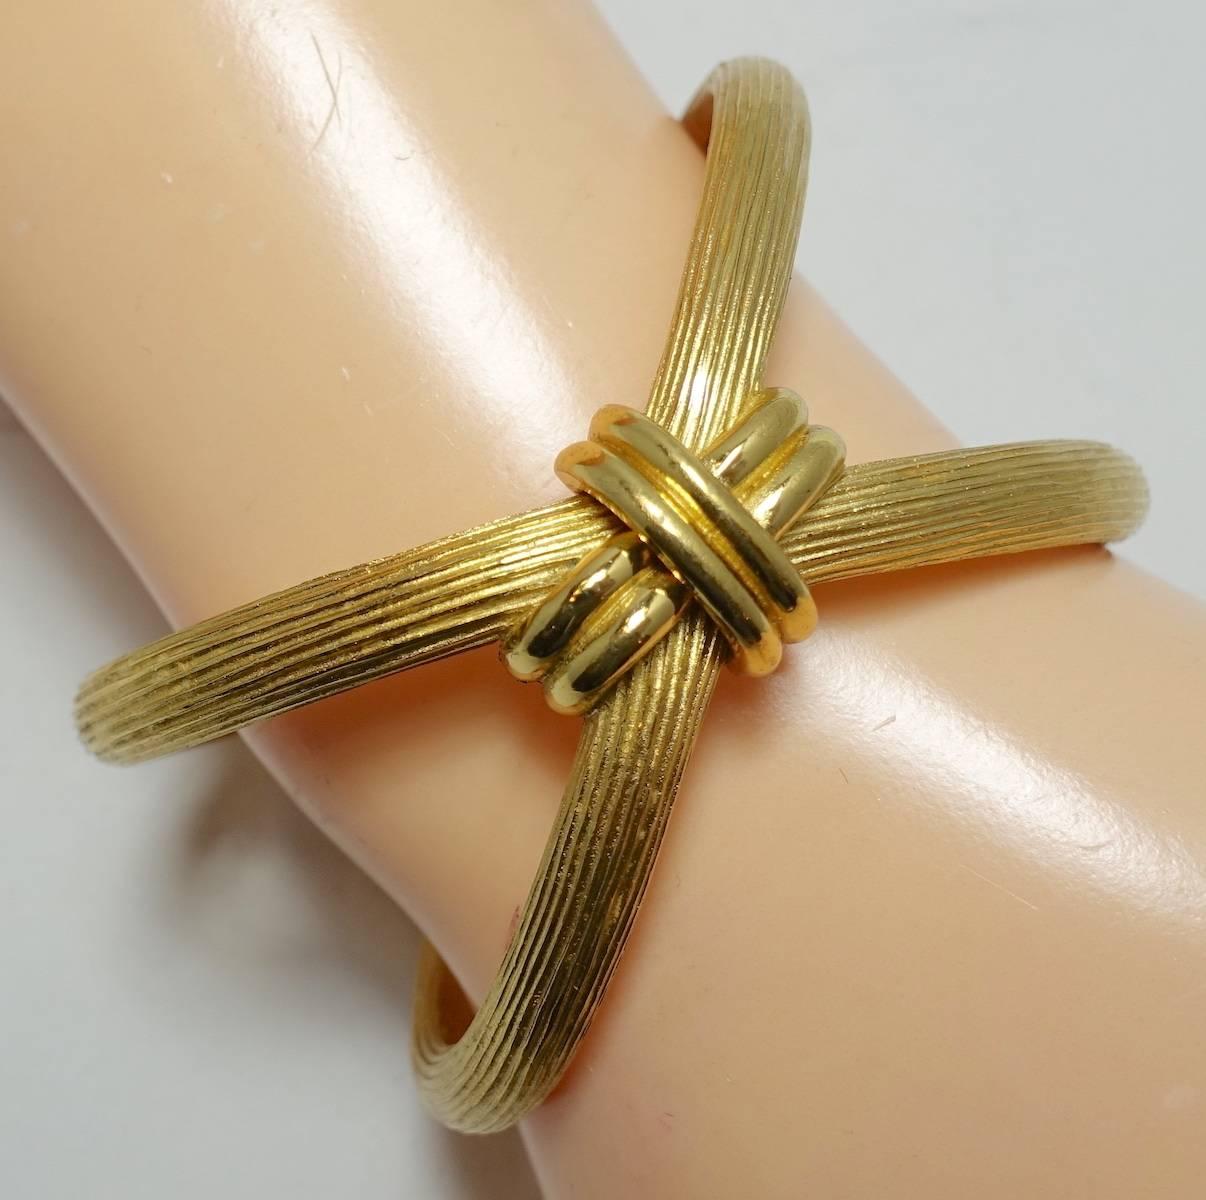 This unique1960s Trifari bracelet features an unusual, abstract modernist design in a gold tone setting.  The bracelet measures 7-1/2” x 1/8” and is signed “Trifari”.  It is in excellent condition.